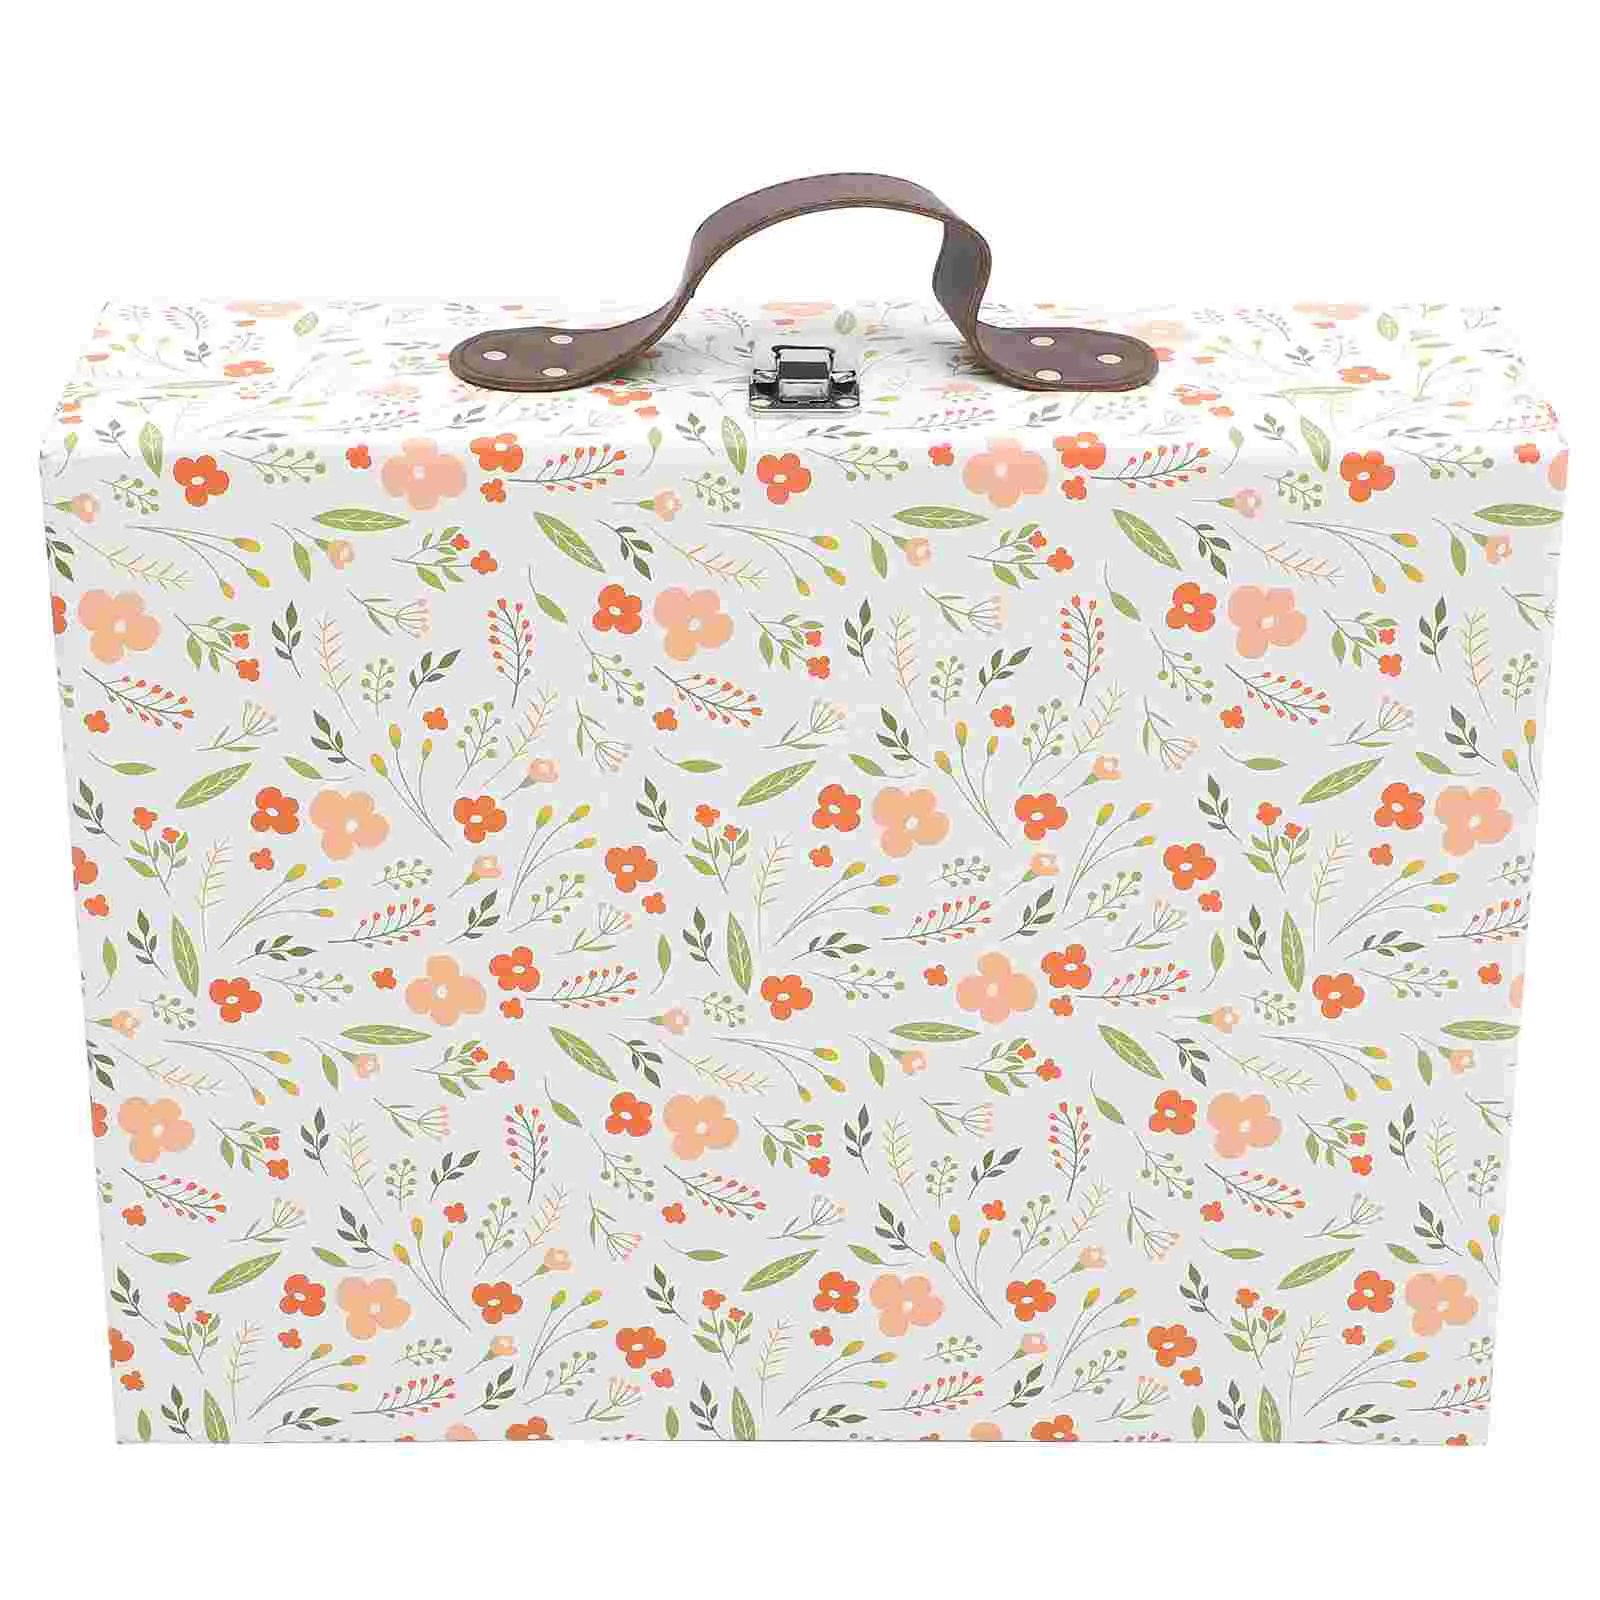 

Paperboard Suitcases Cardboard Suitcase Box Handle Vintage Decorative Box Flower Print Doll Clothes Storage Decorative Gift